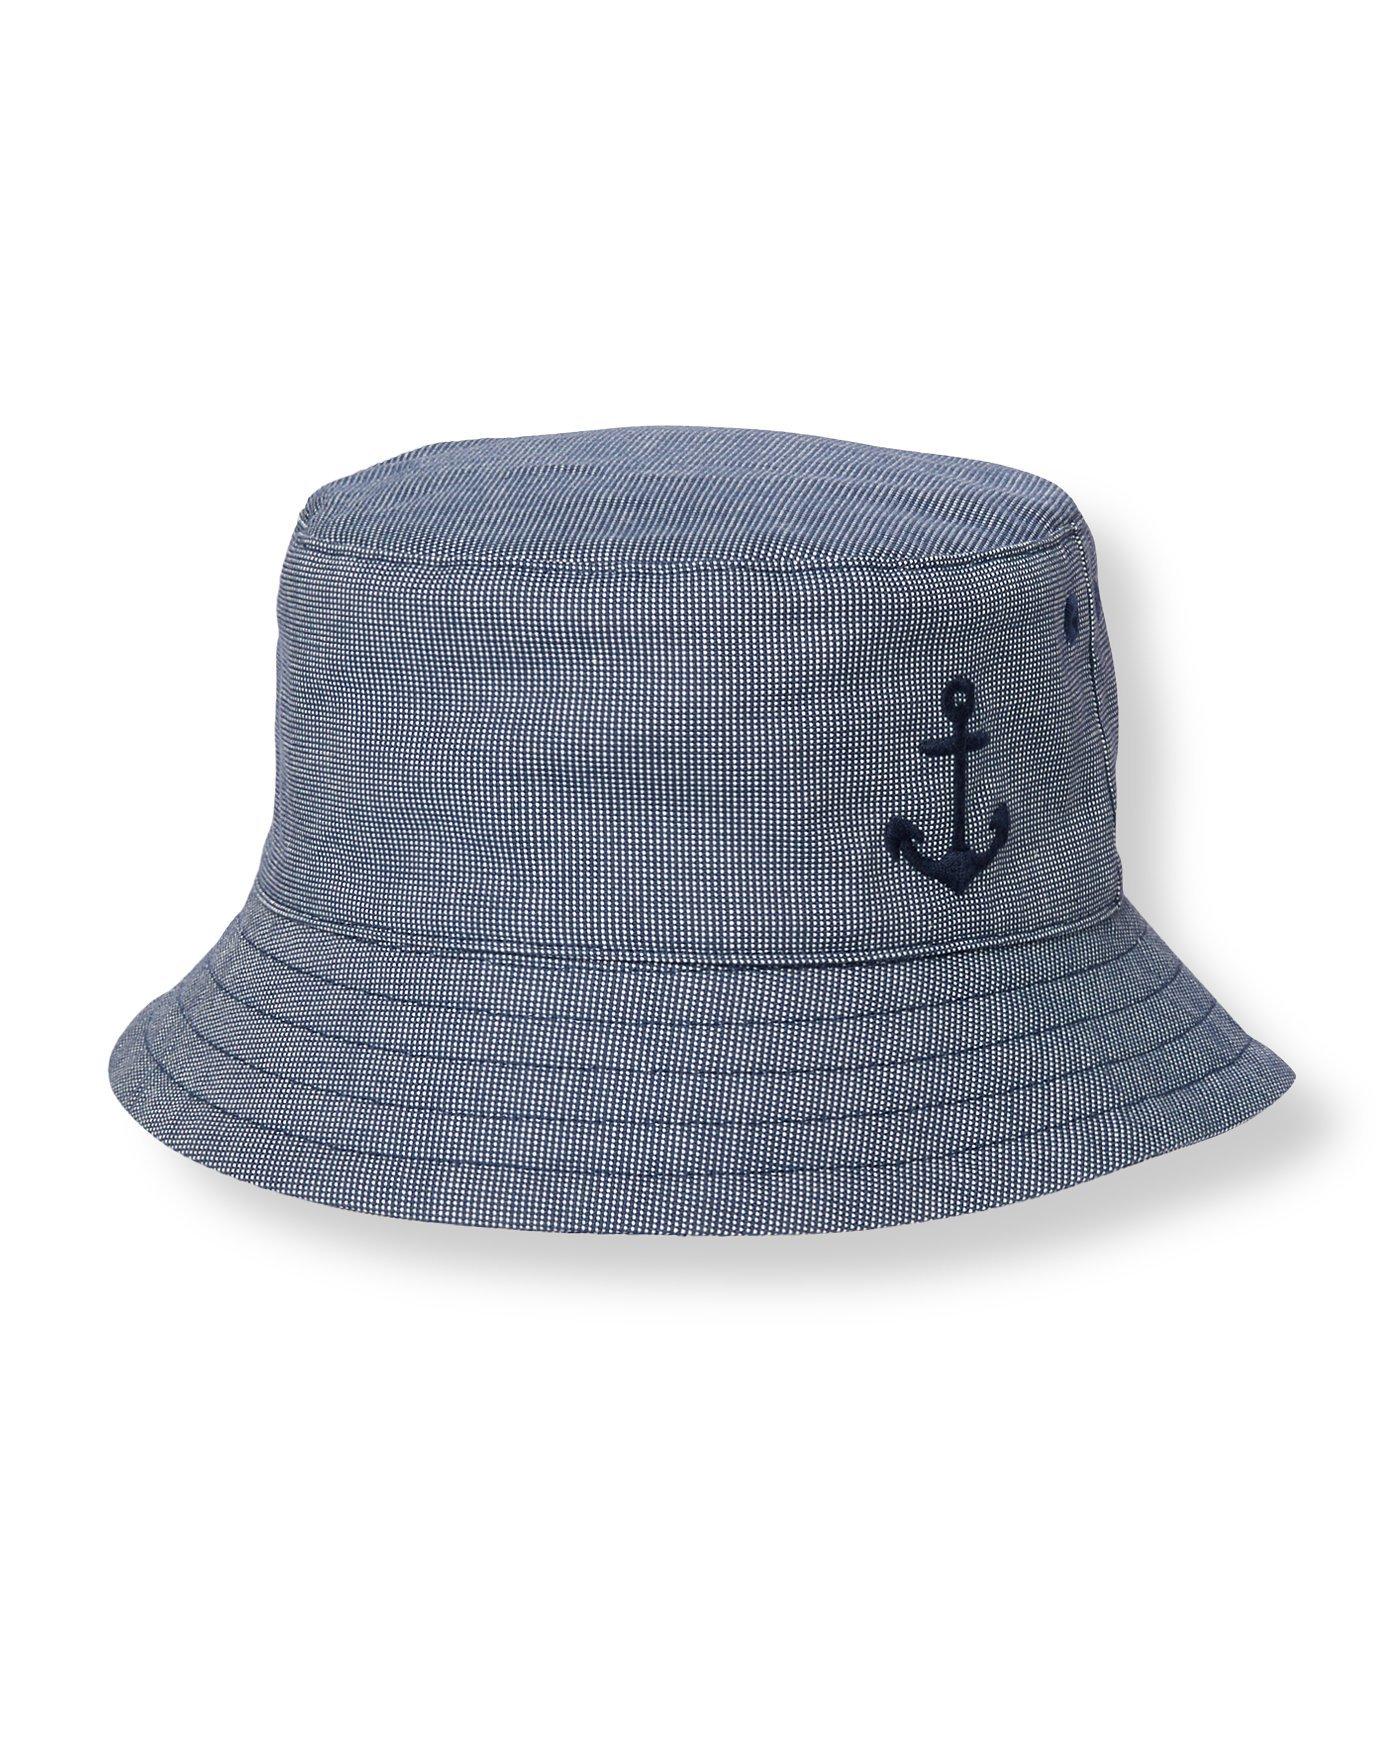 Anchor Canvas Bucket Hat image number 0